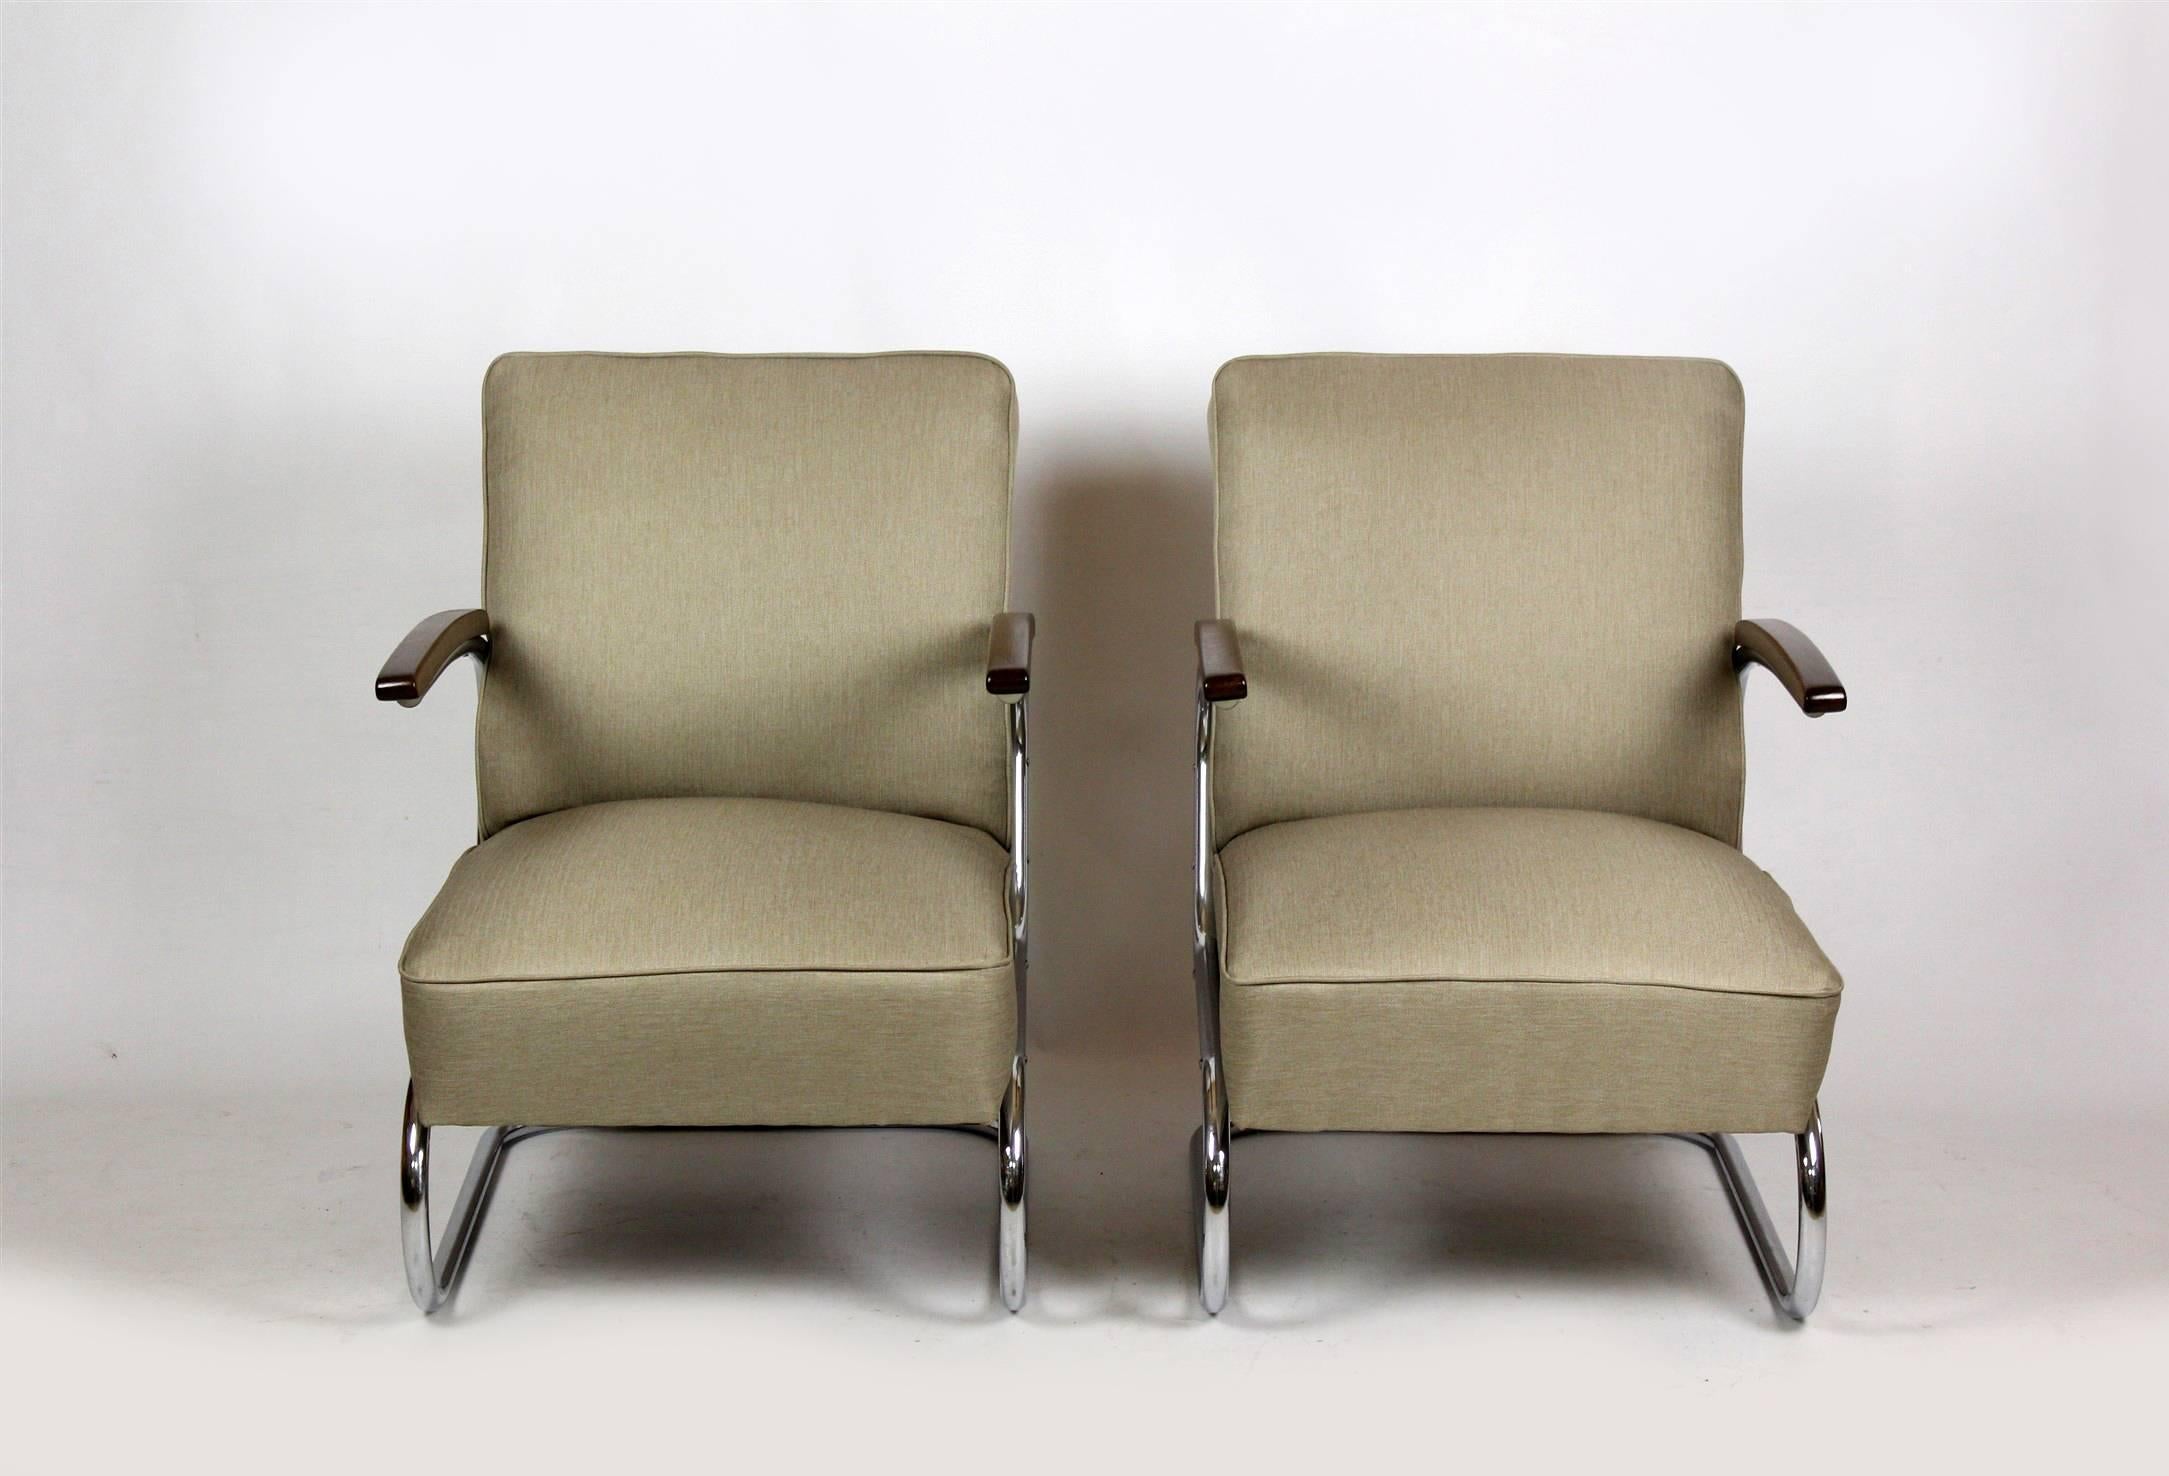 Bauhaus Cantilever S-411 Armchairs by W. H. Gispen for Mücke Melder, 1930s, Set of Two